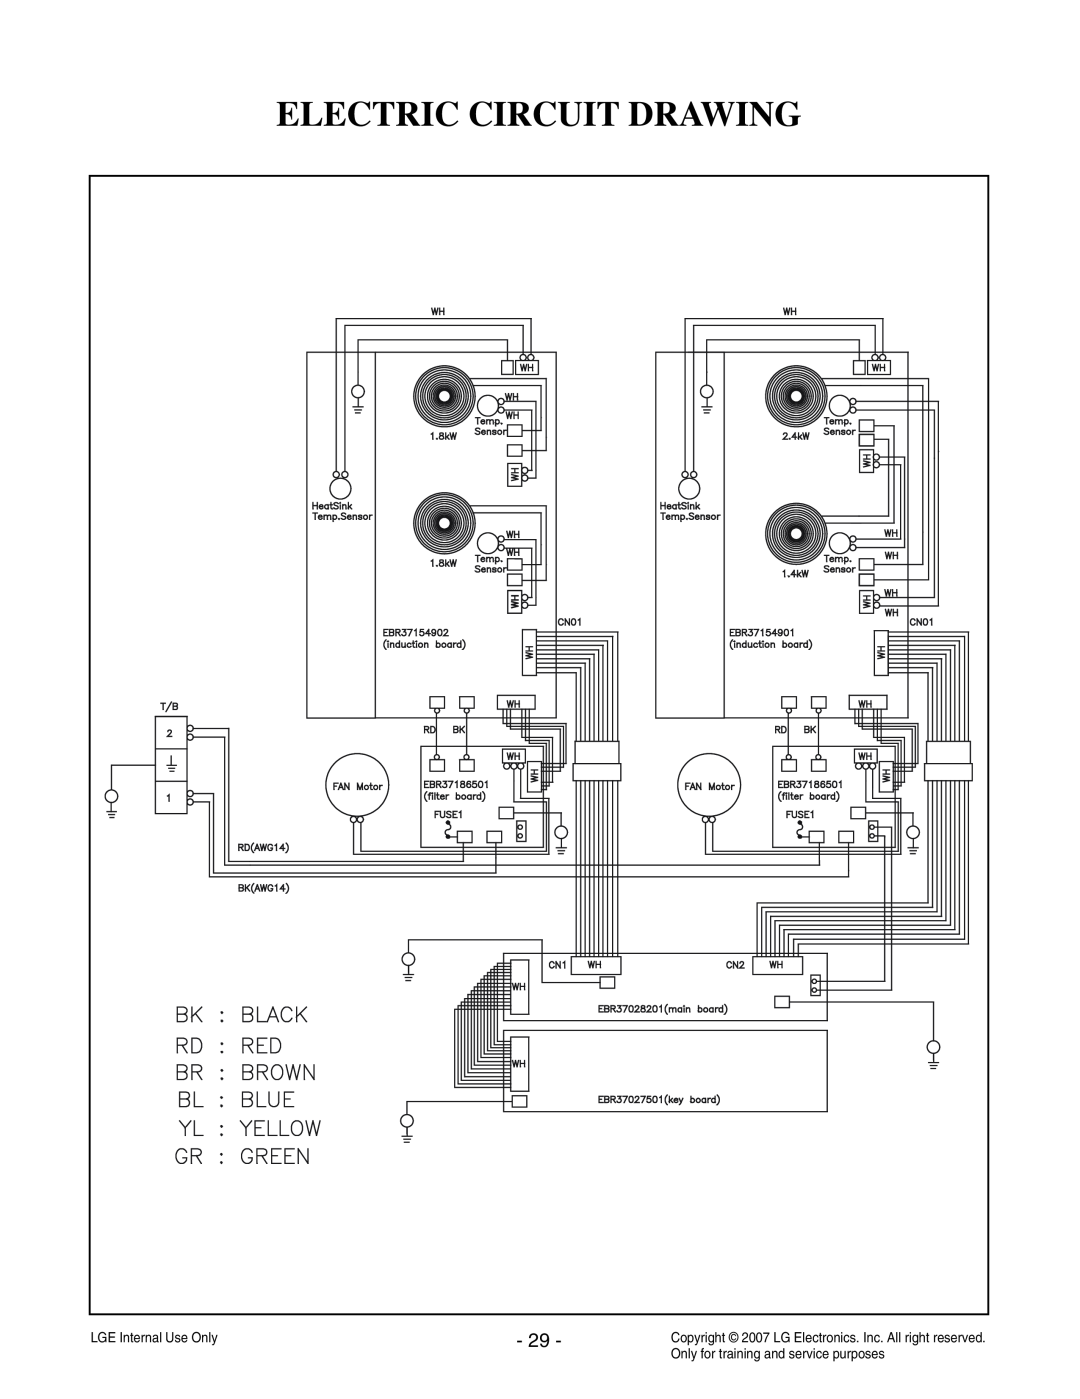 LG Electronics LCE30845 Electric Circuit Drawing, LGE Internal Use Only, Only for training and service purposes 